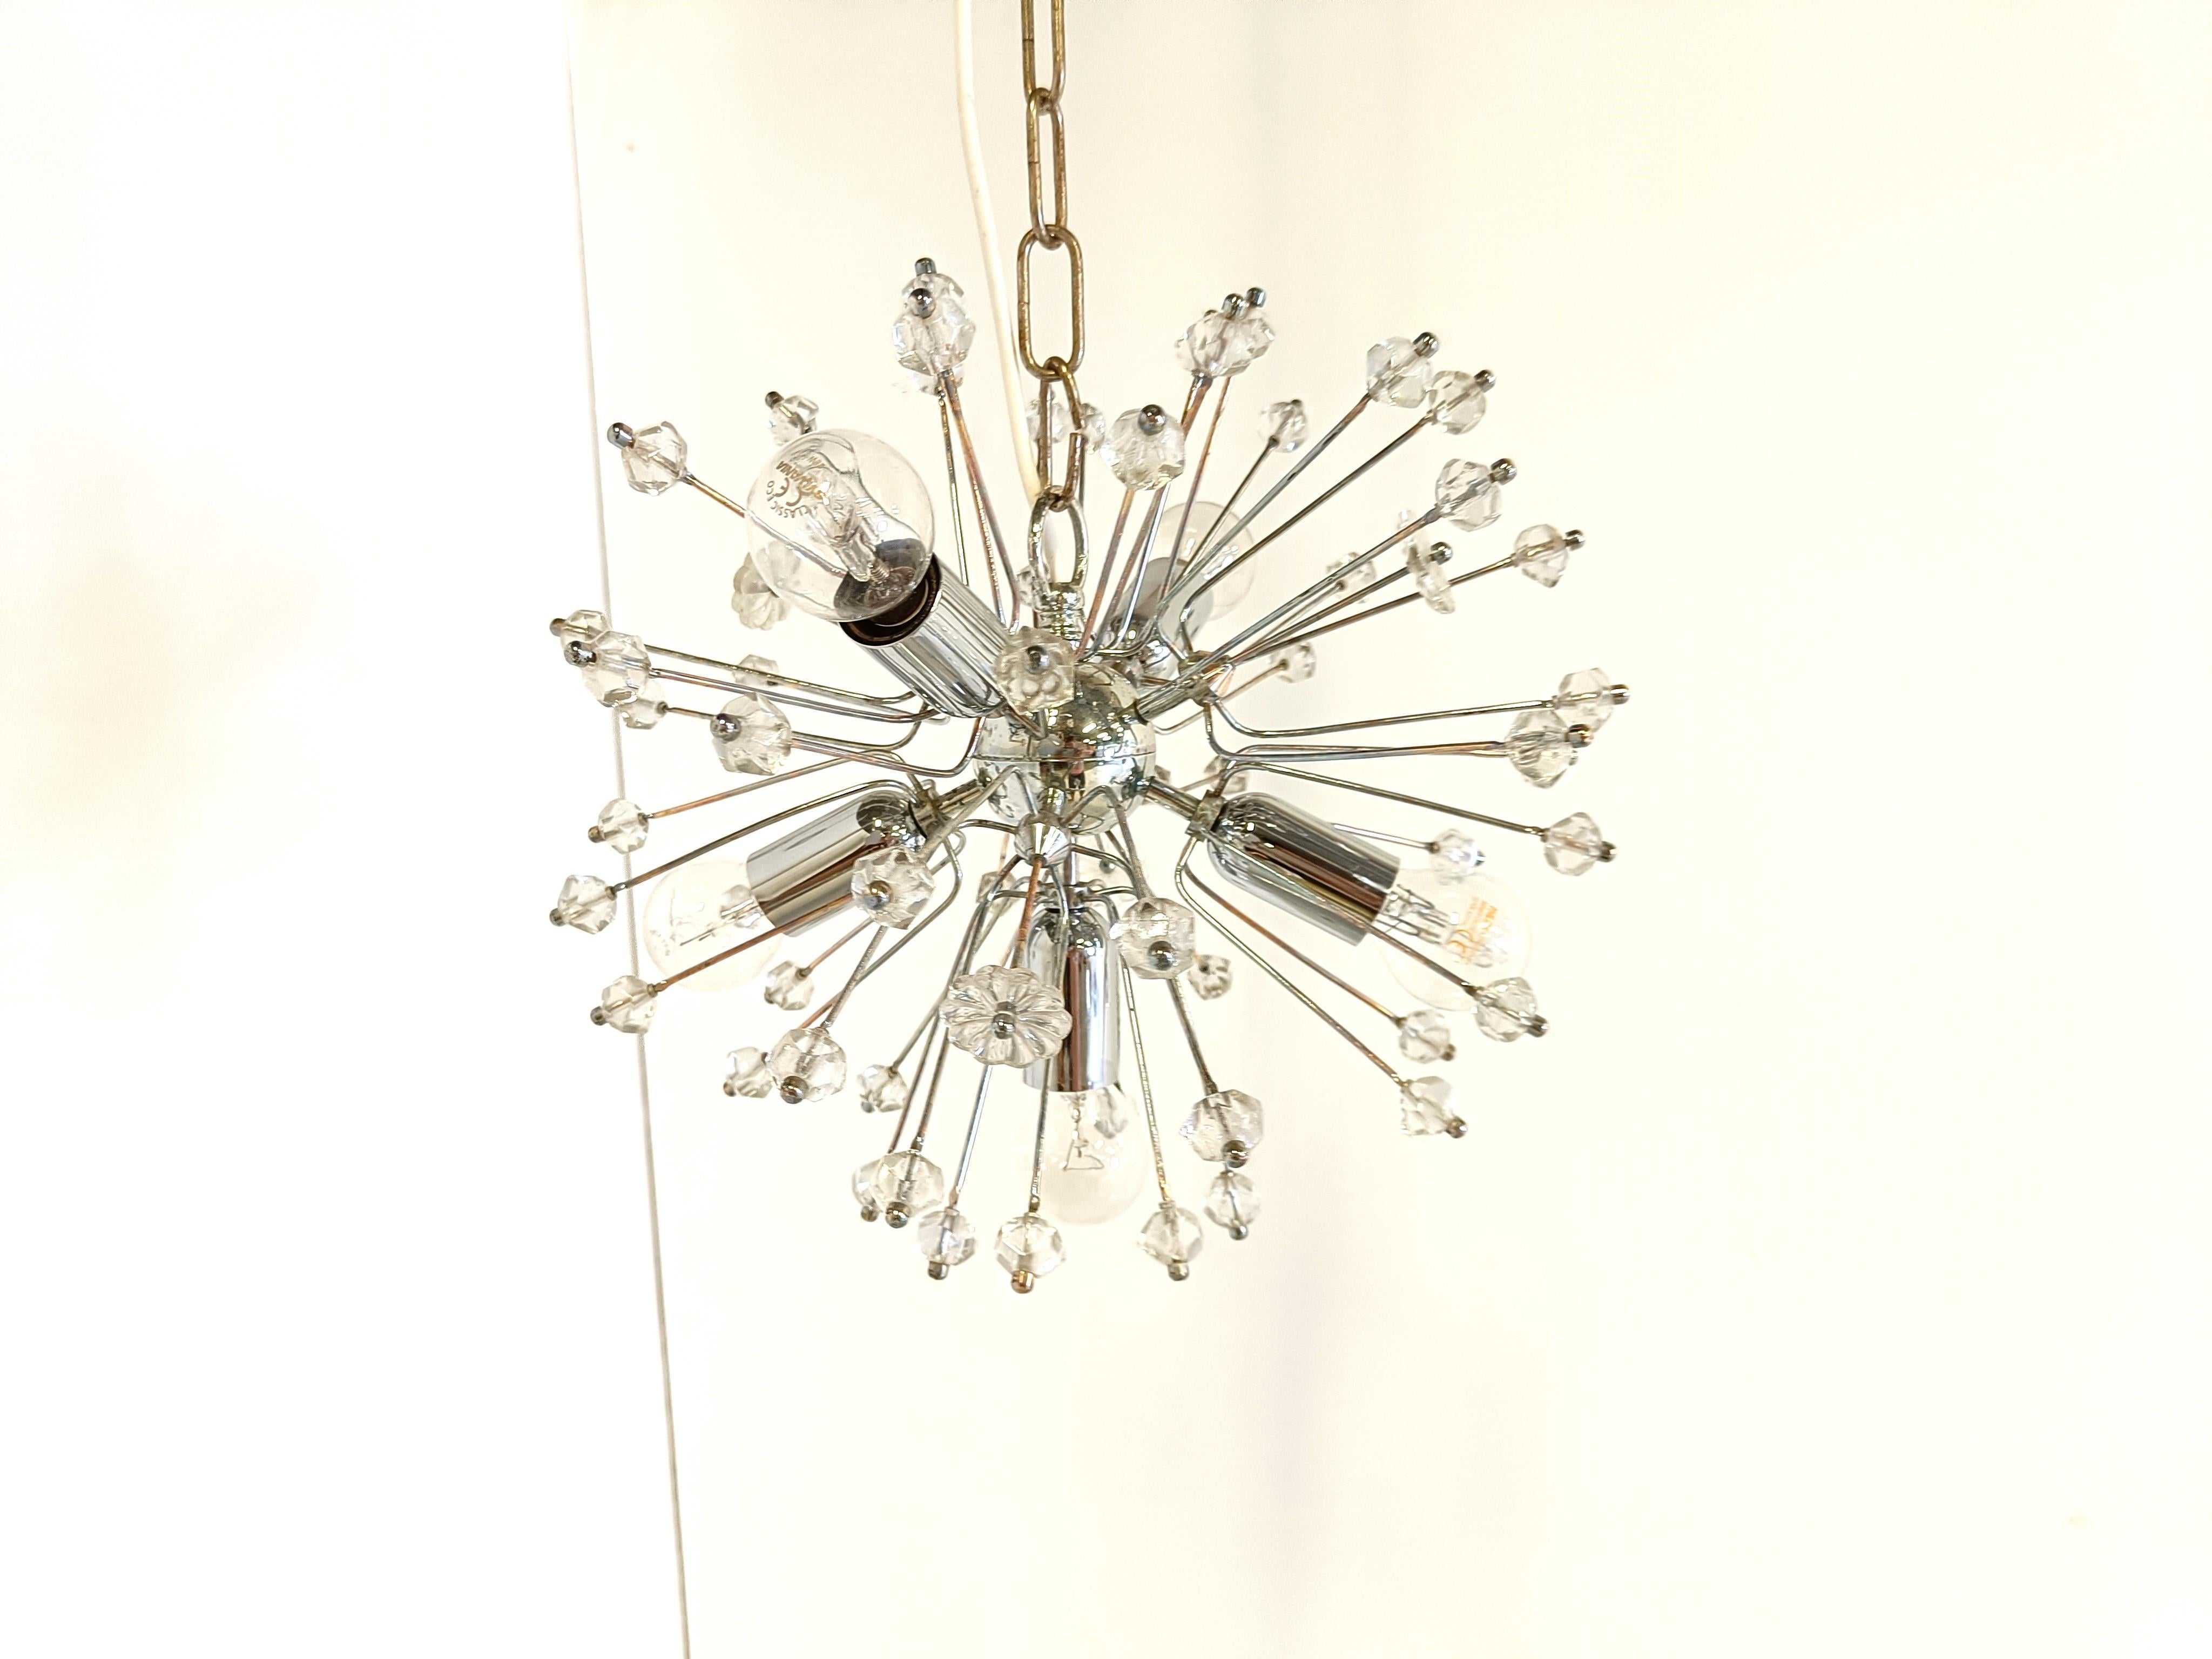 Mid century sputnik chandelier designed by Emil Stejnar for Rupert Nikoll.

1960s Austria 

Tested and ready to use.

We can change the chain length if desired.

Works with E14 light bulbs.

Dimensions:
Height: 58cm/22.83
Diameter: